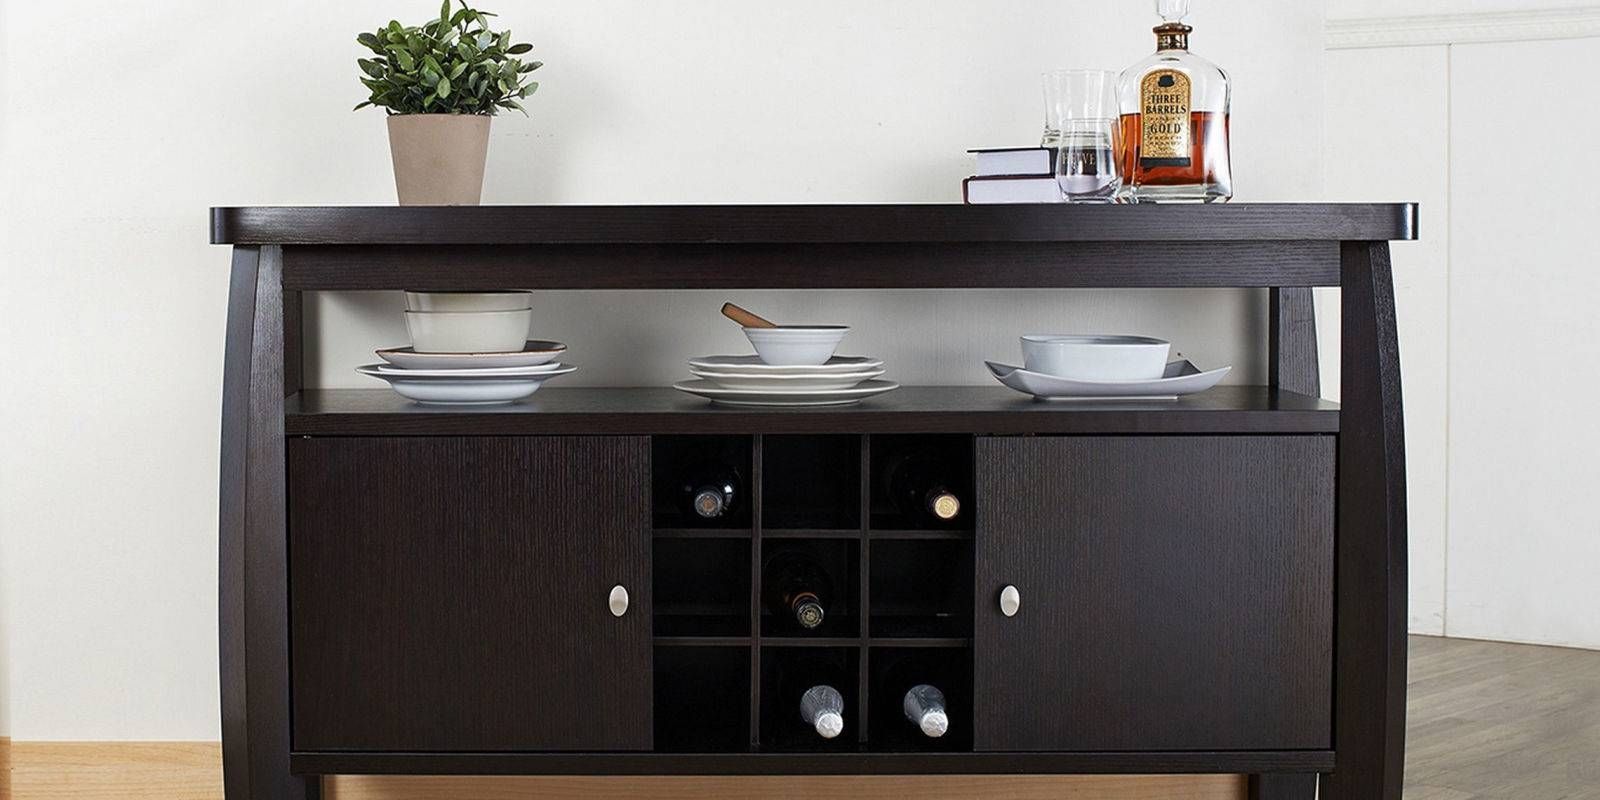 11 Best Sideboards And Buffets In 2018 – Reviews Of Sideboards Intended For Most Recent Sideboard Buffet Tables (View 5 of 15)